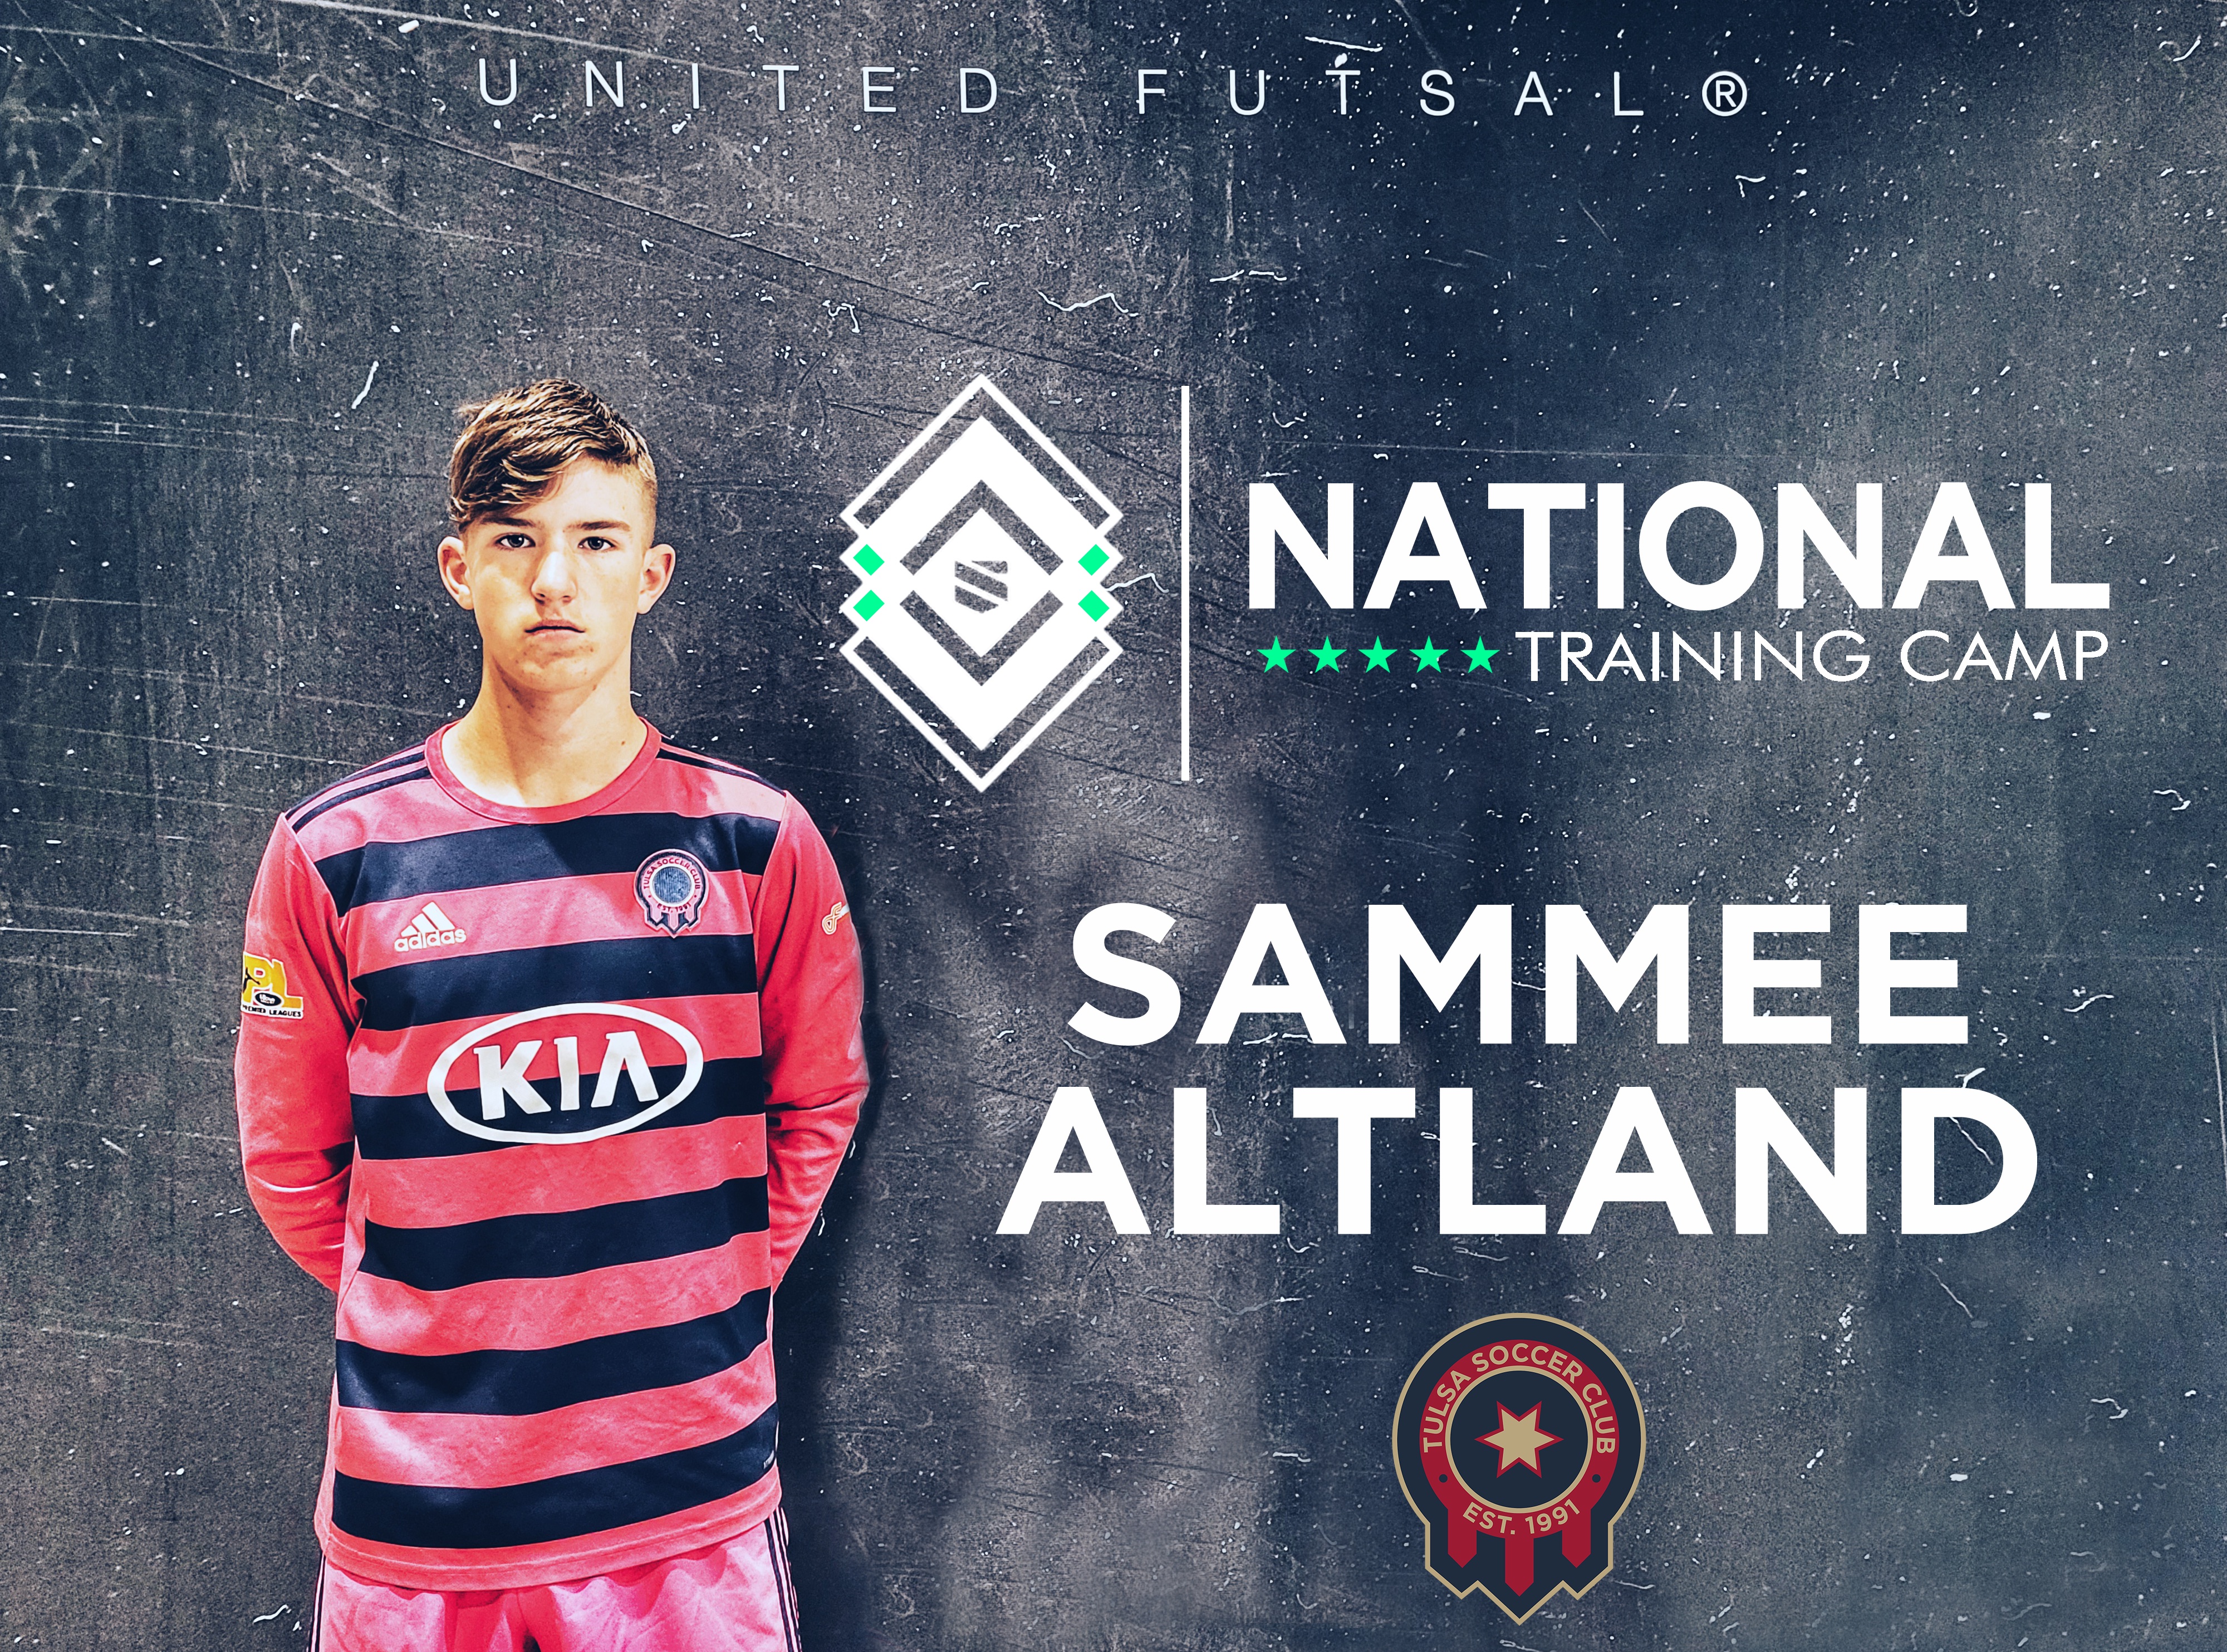 Sammee Altland selected for United Futsal National Training Camp